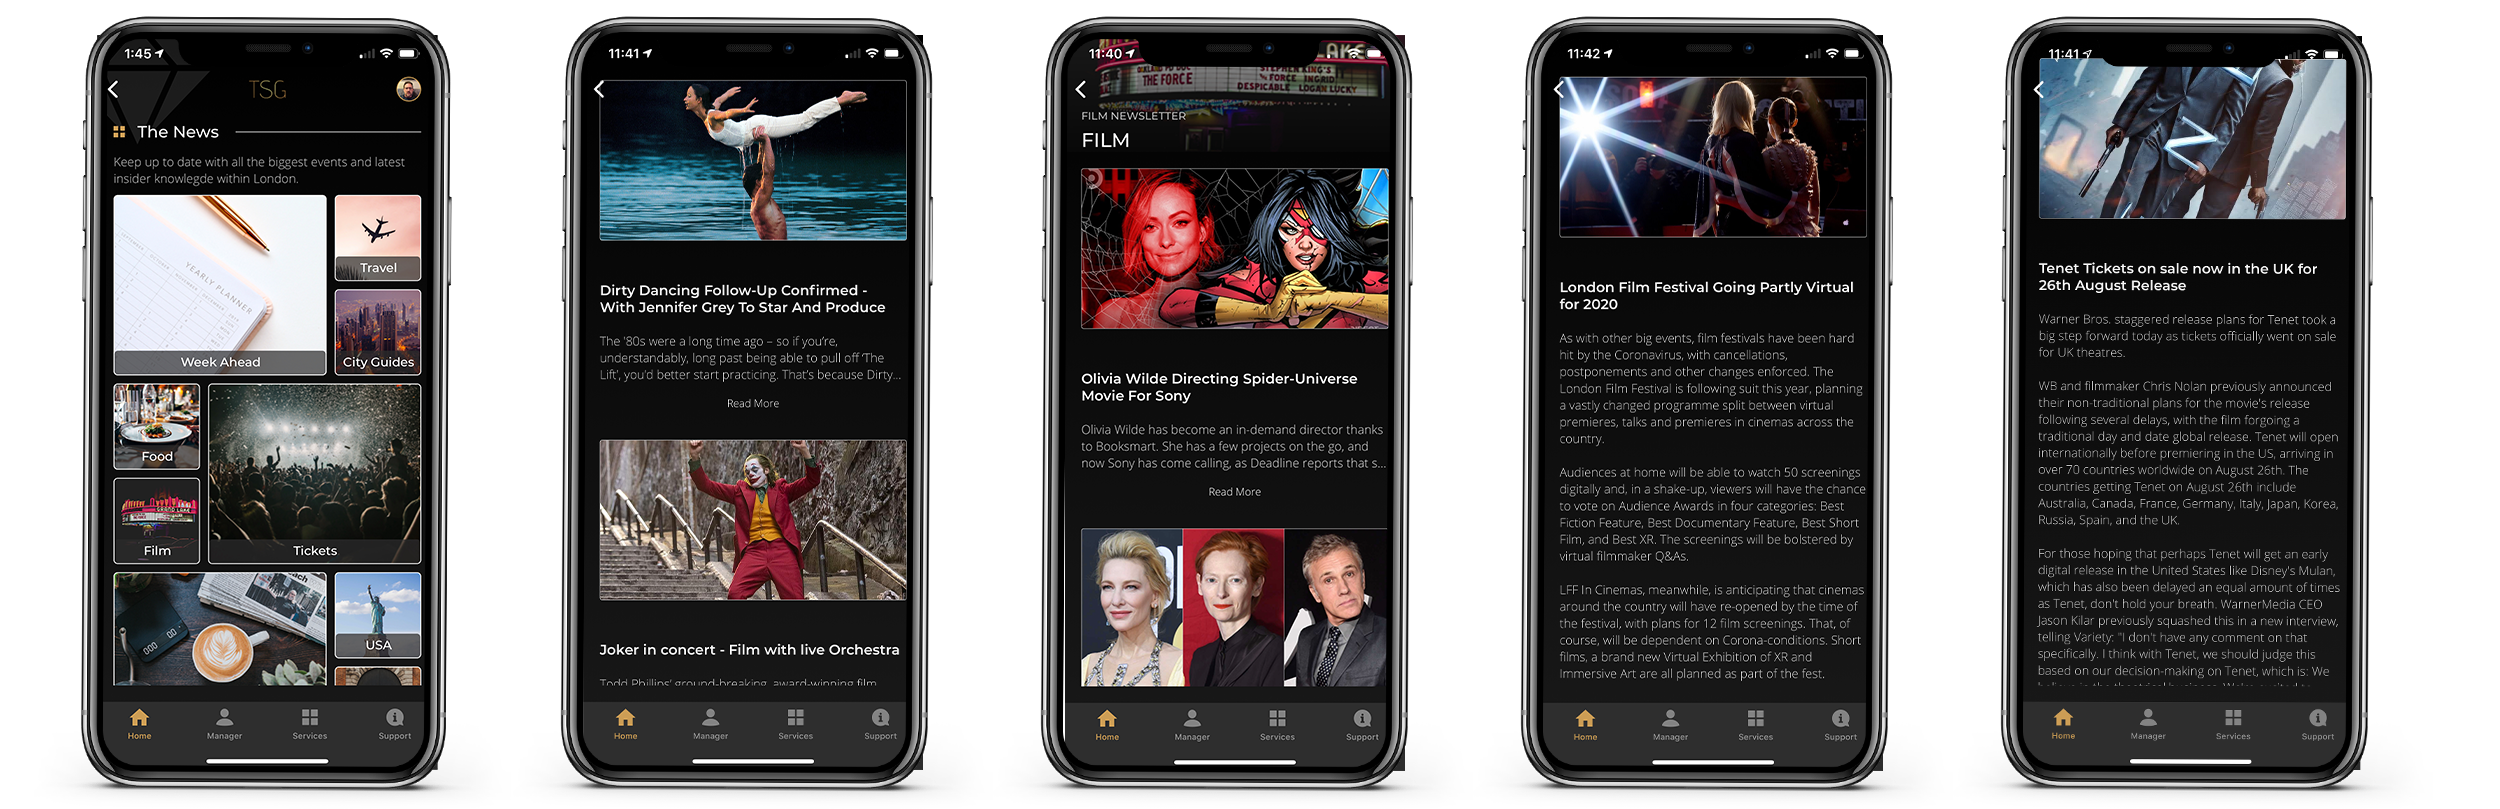 view the latest film premiere and red carpet newsa new and events through the sincura app